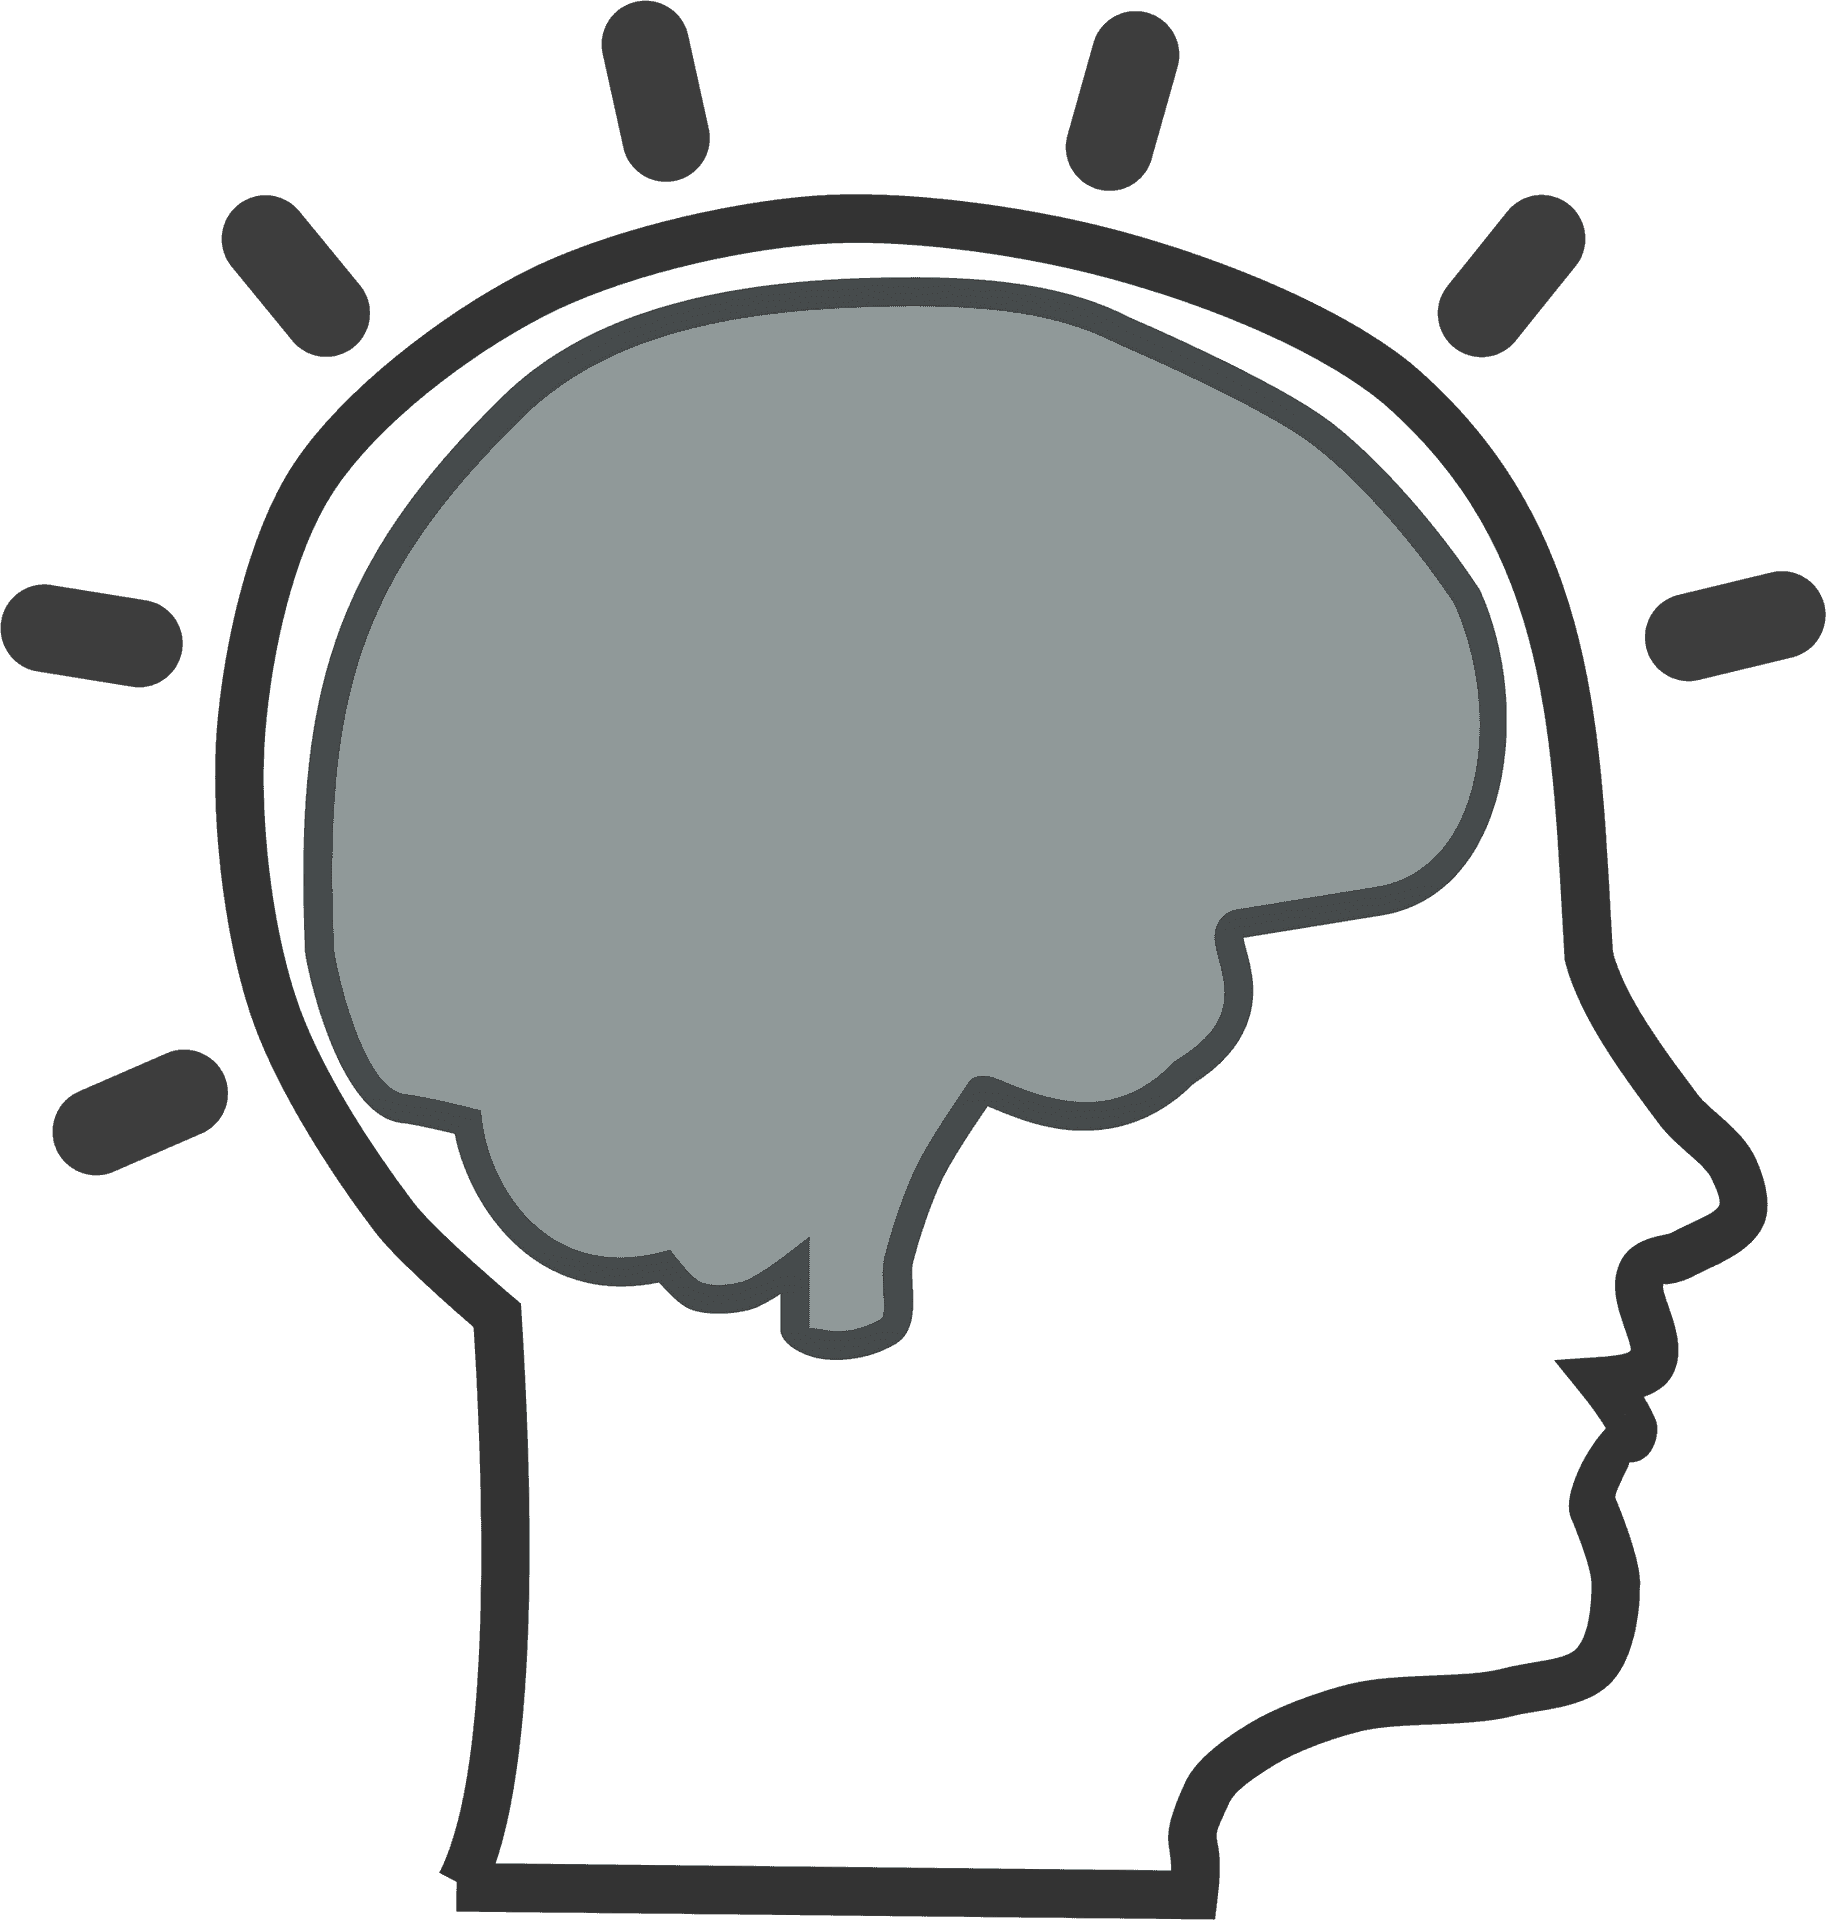 Stylized Brain Outline Clipart PNG